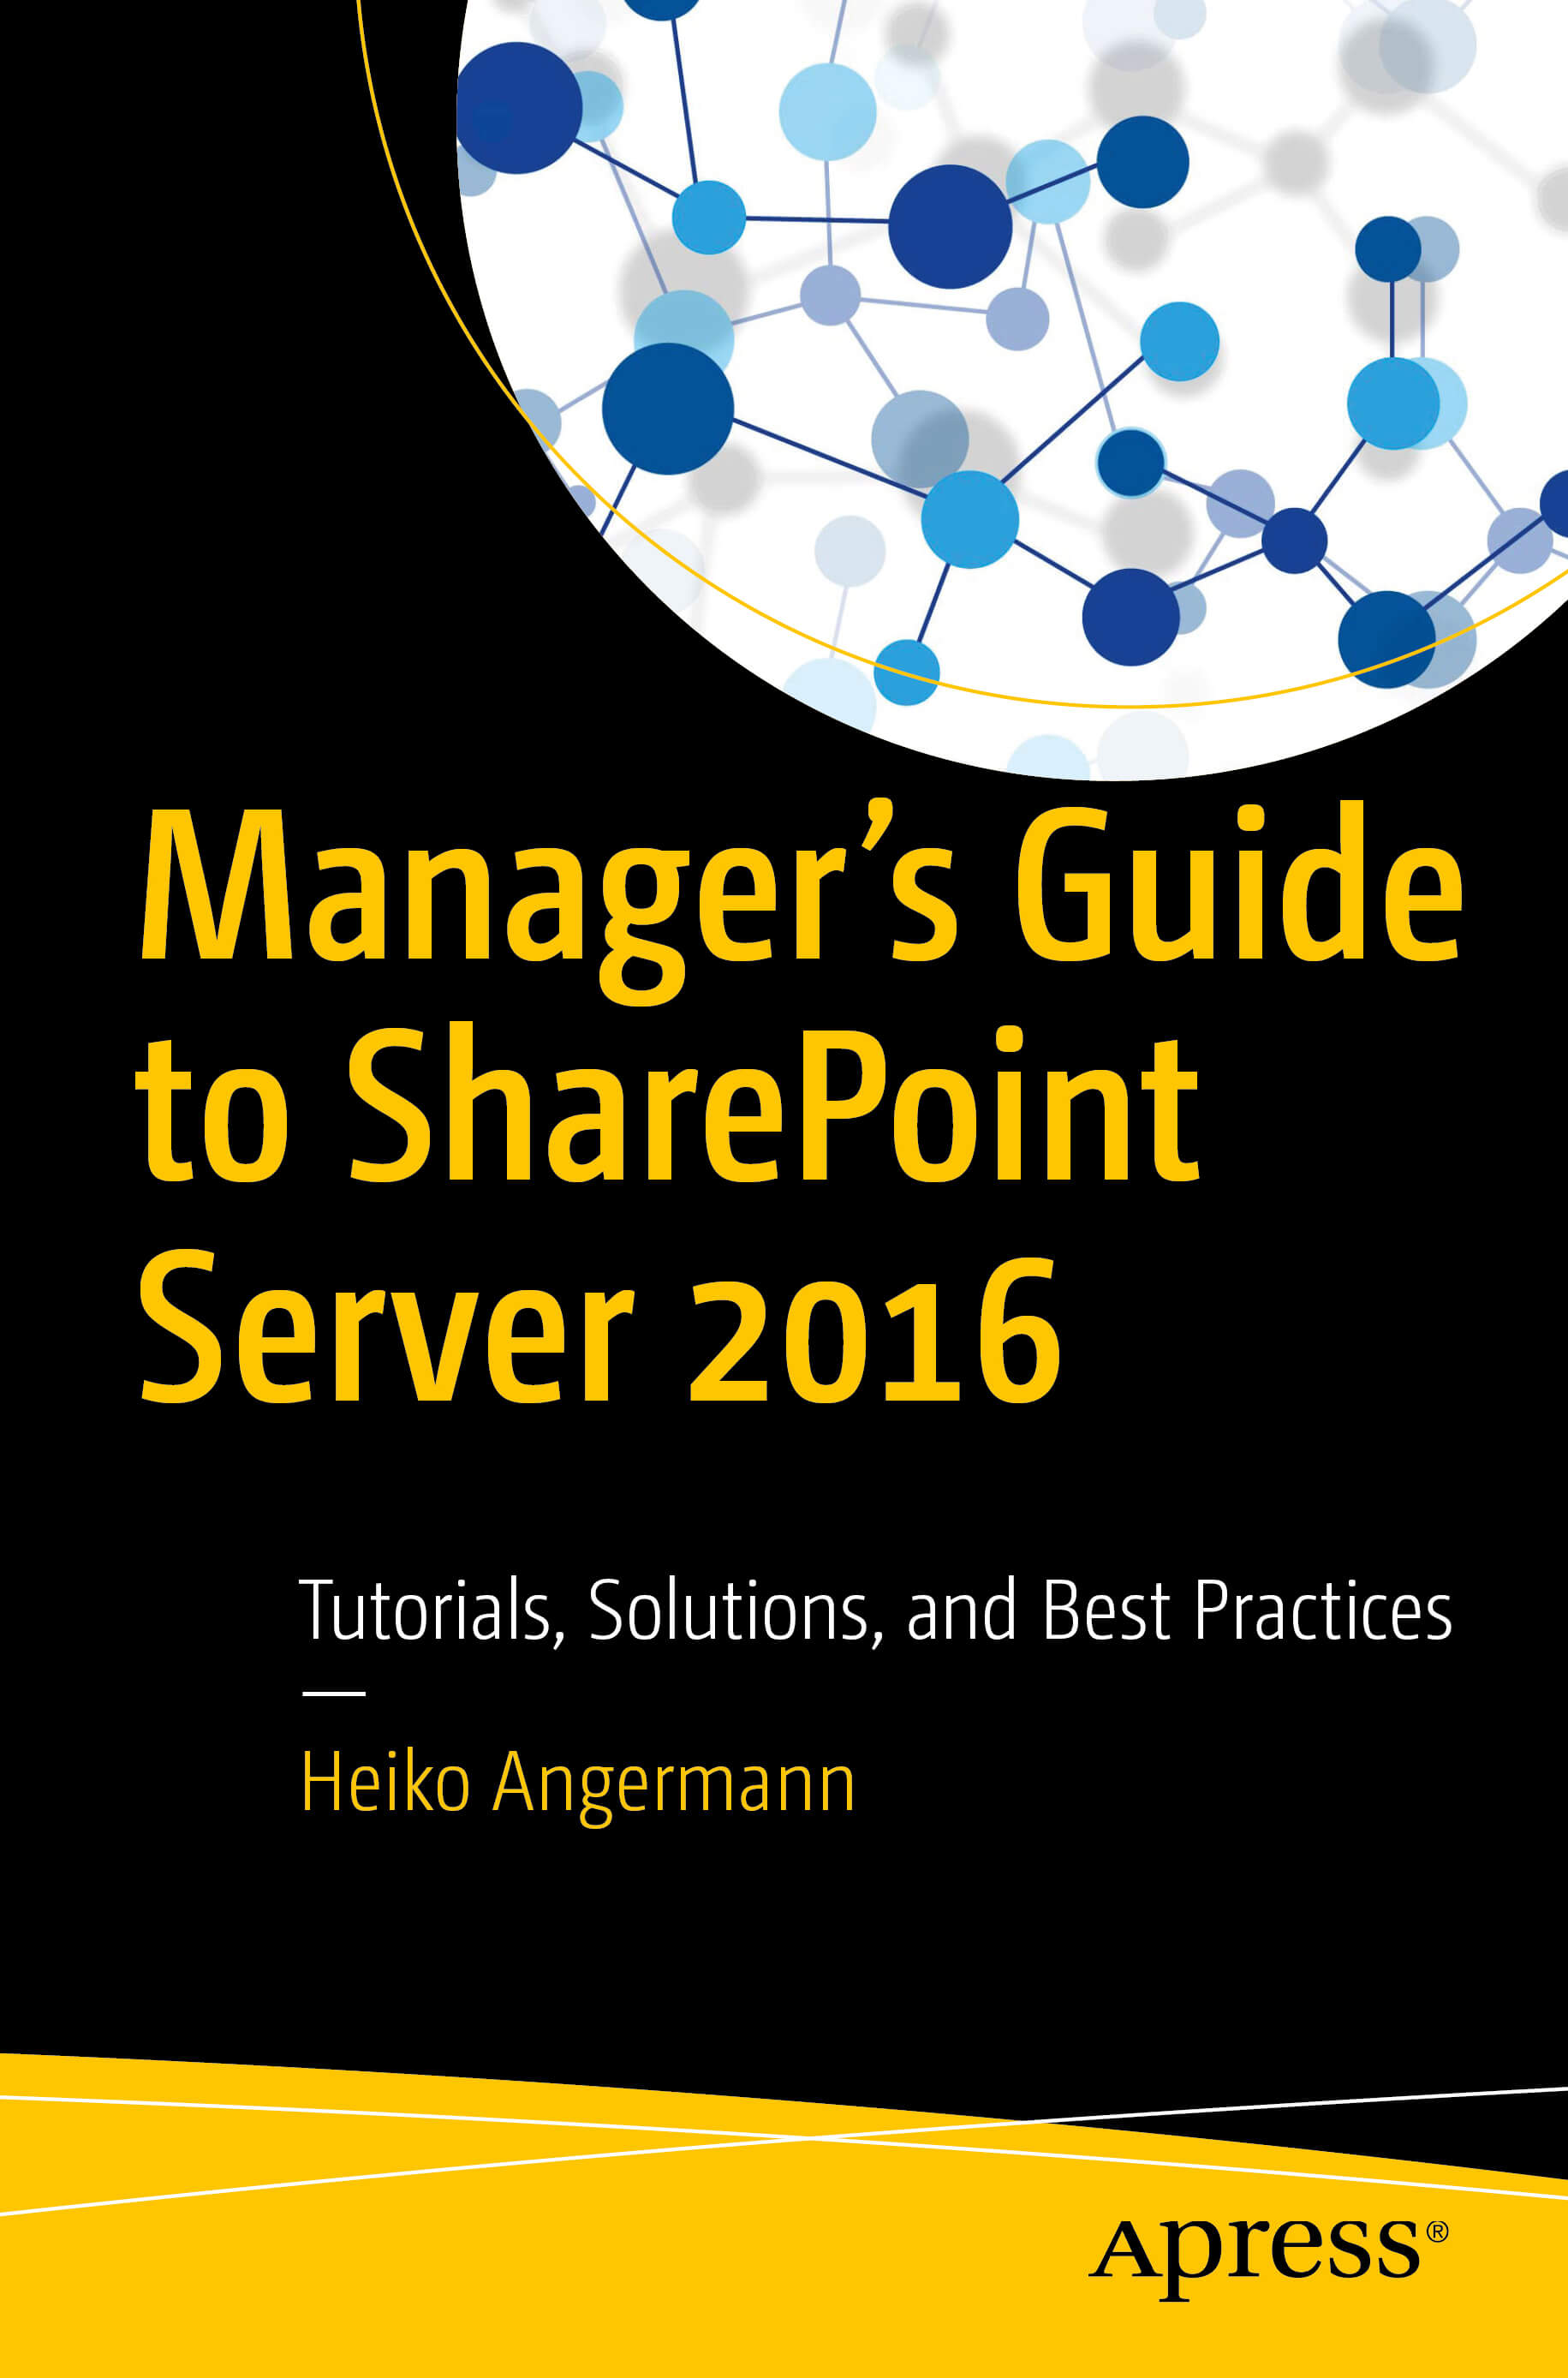 Manager’s Guide to SharePoint Server 2016: Tutorials, Solutions, and Best Practices